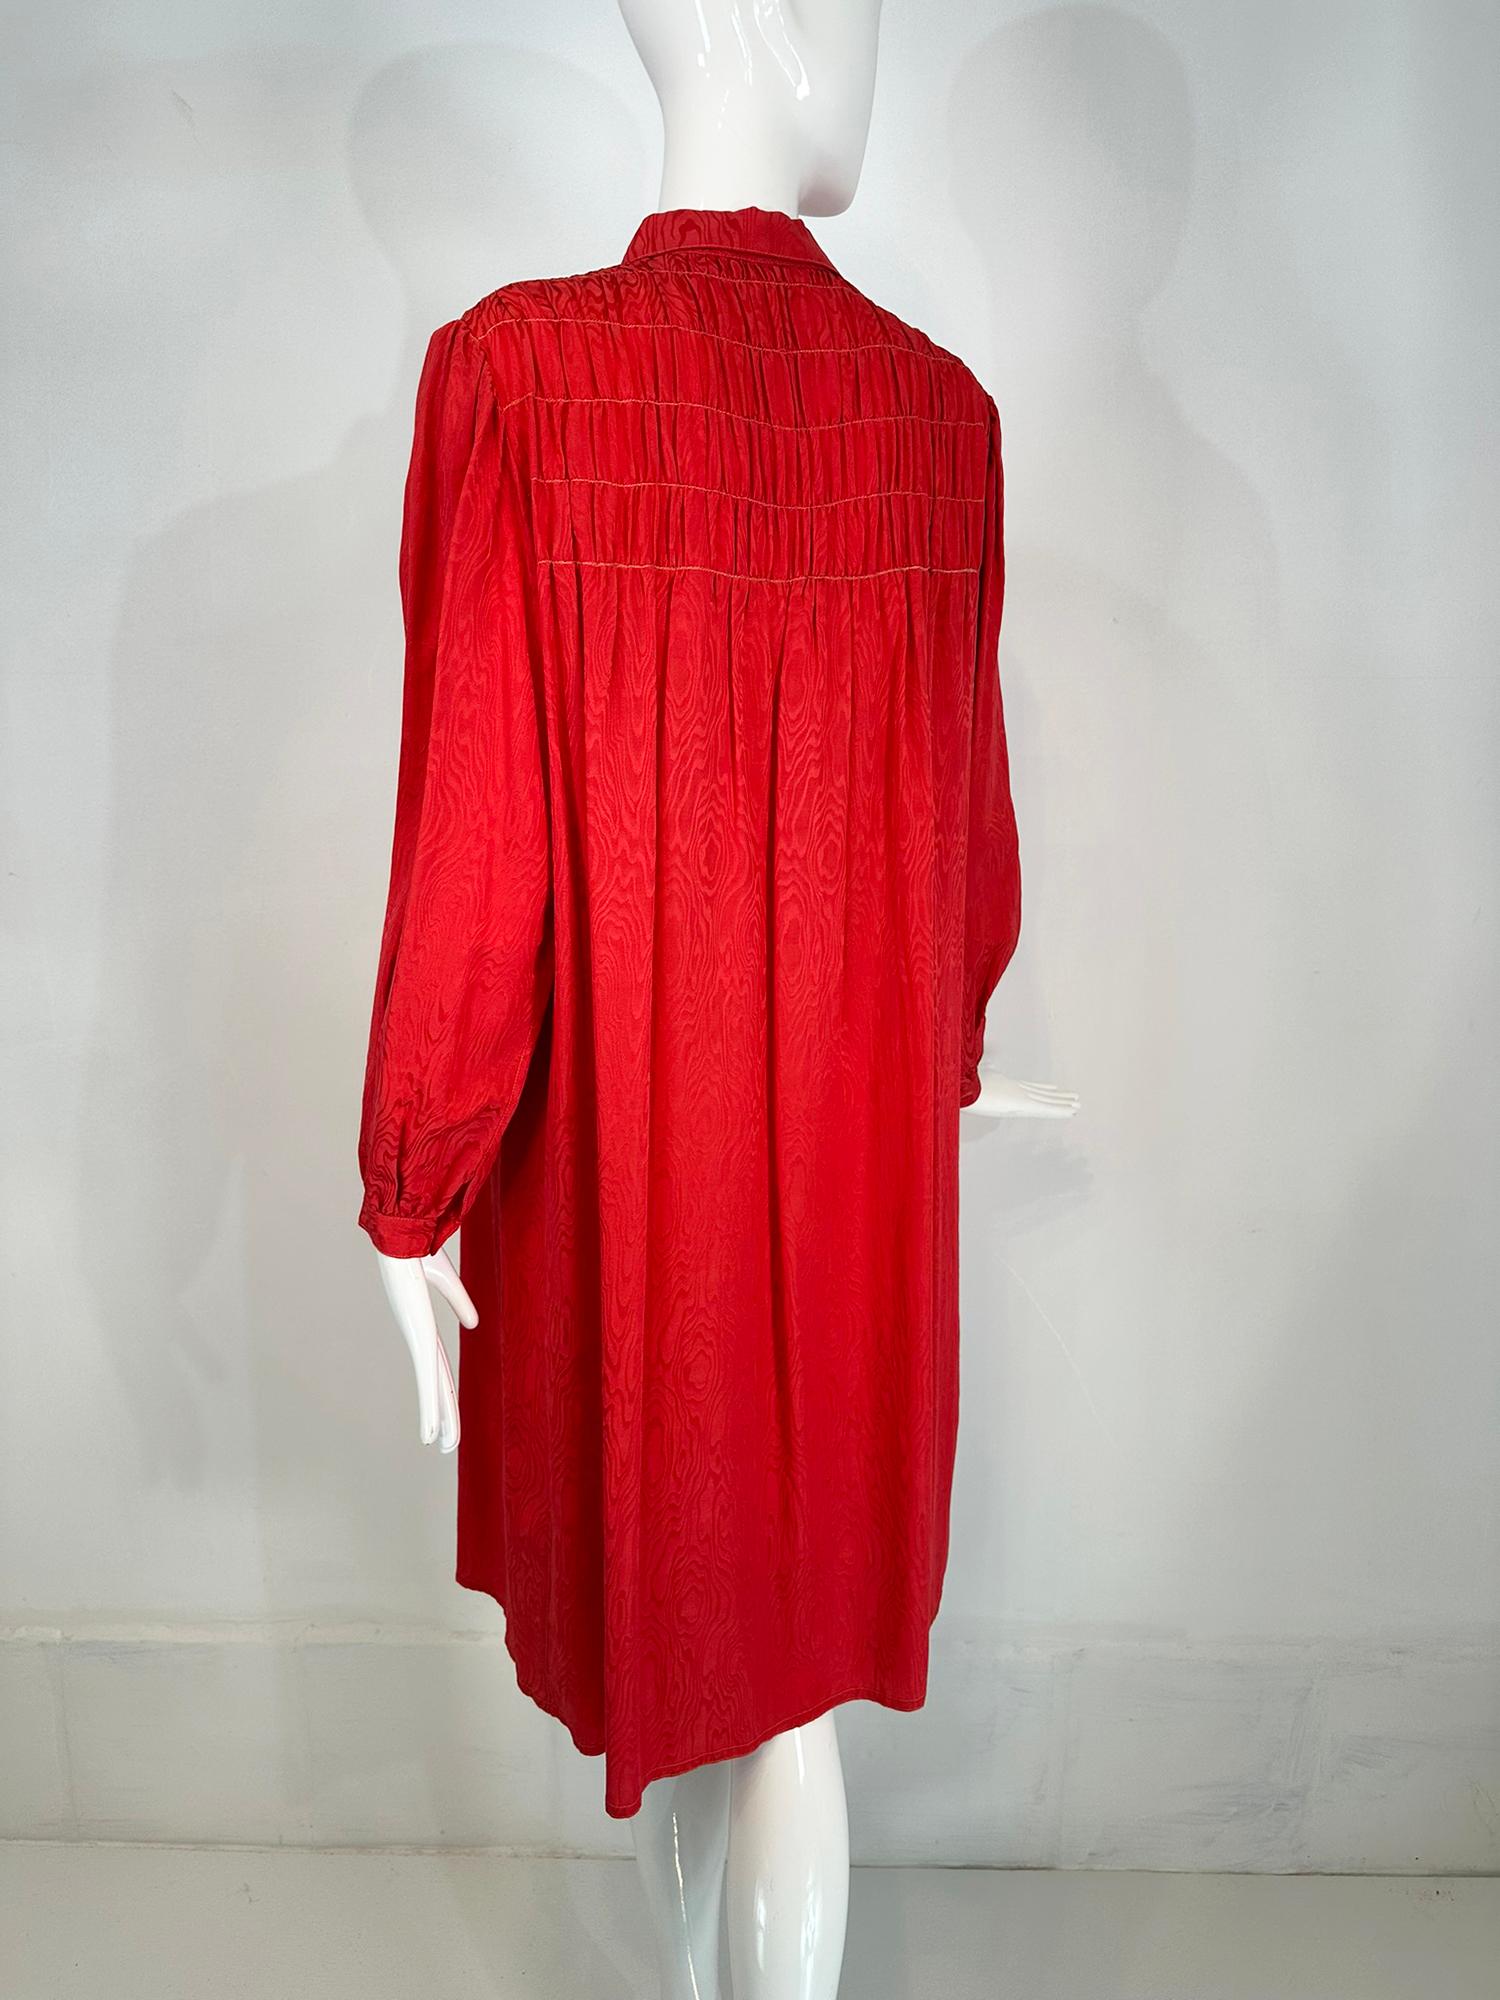 Geoffrey Beene Coral Red Silk Jacquard Smock Dress 1970s For Sale 2